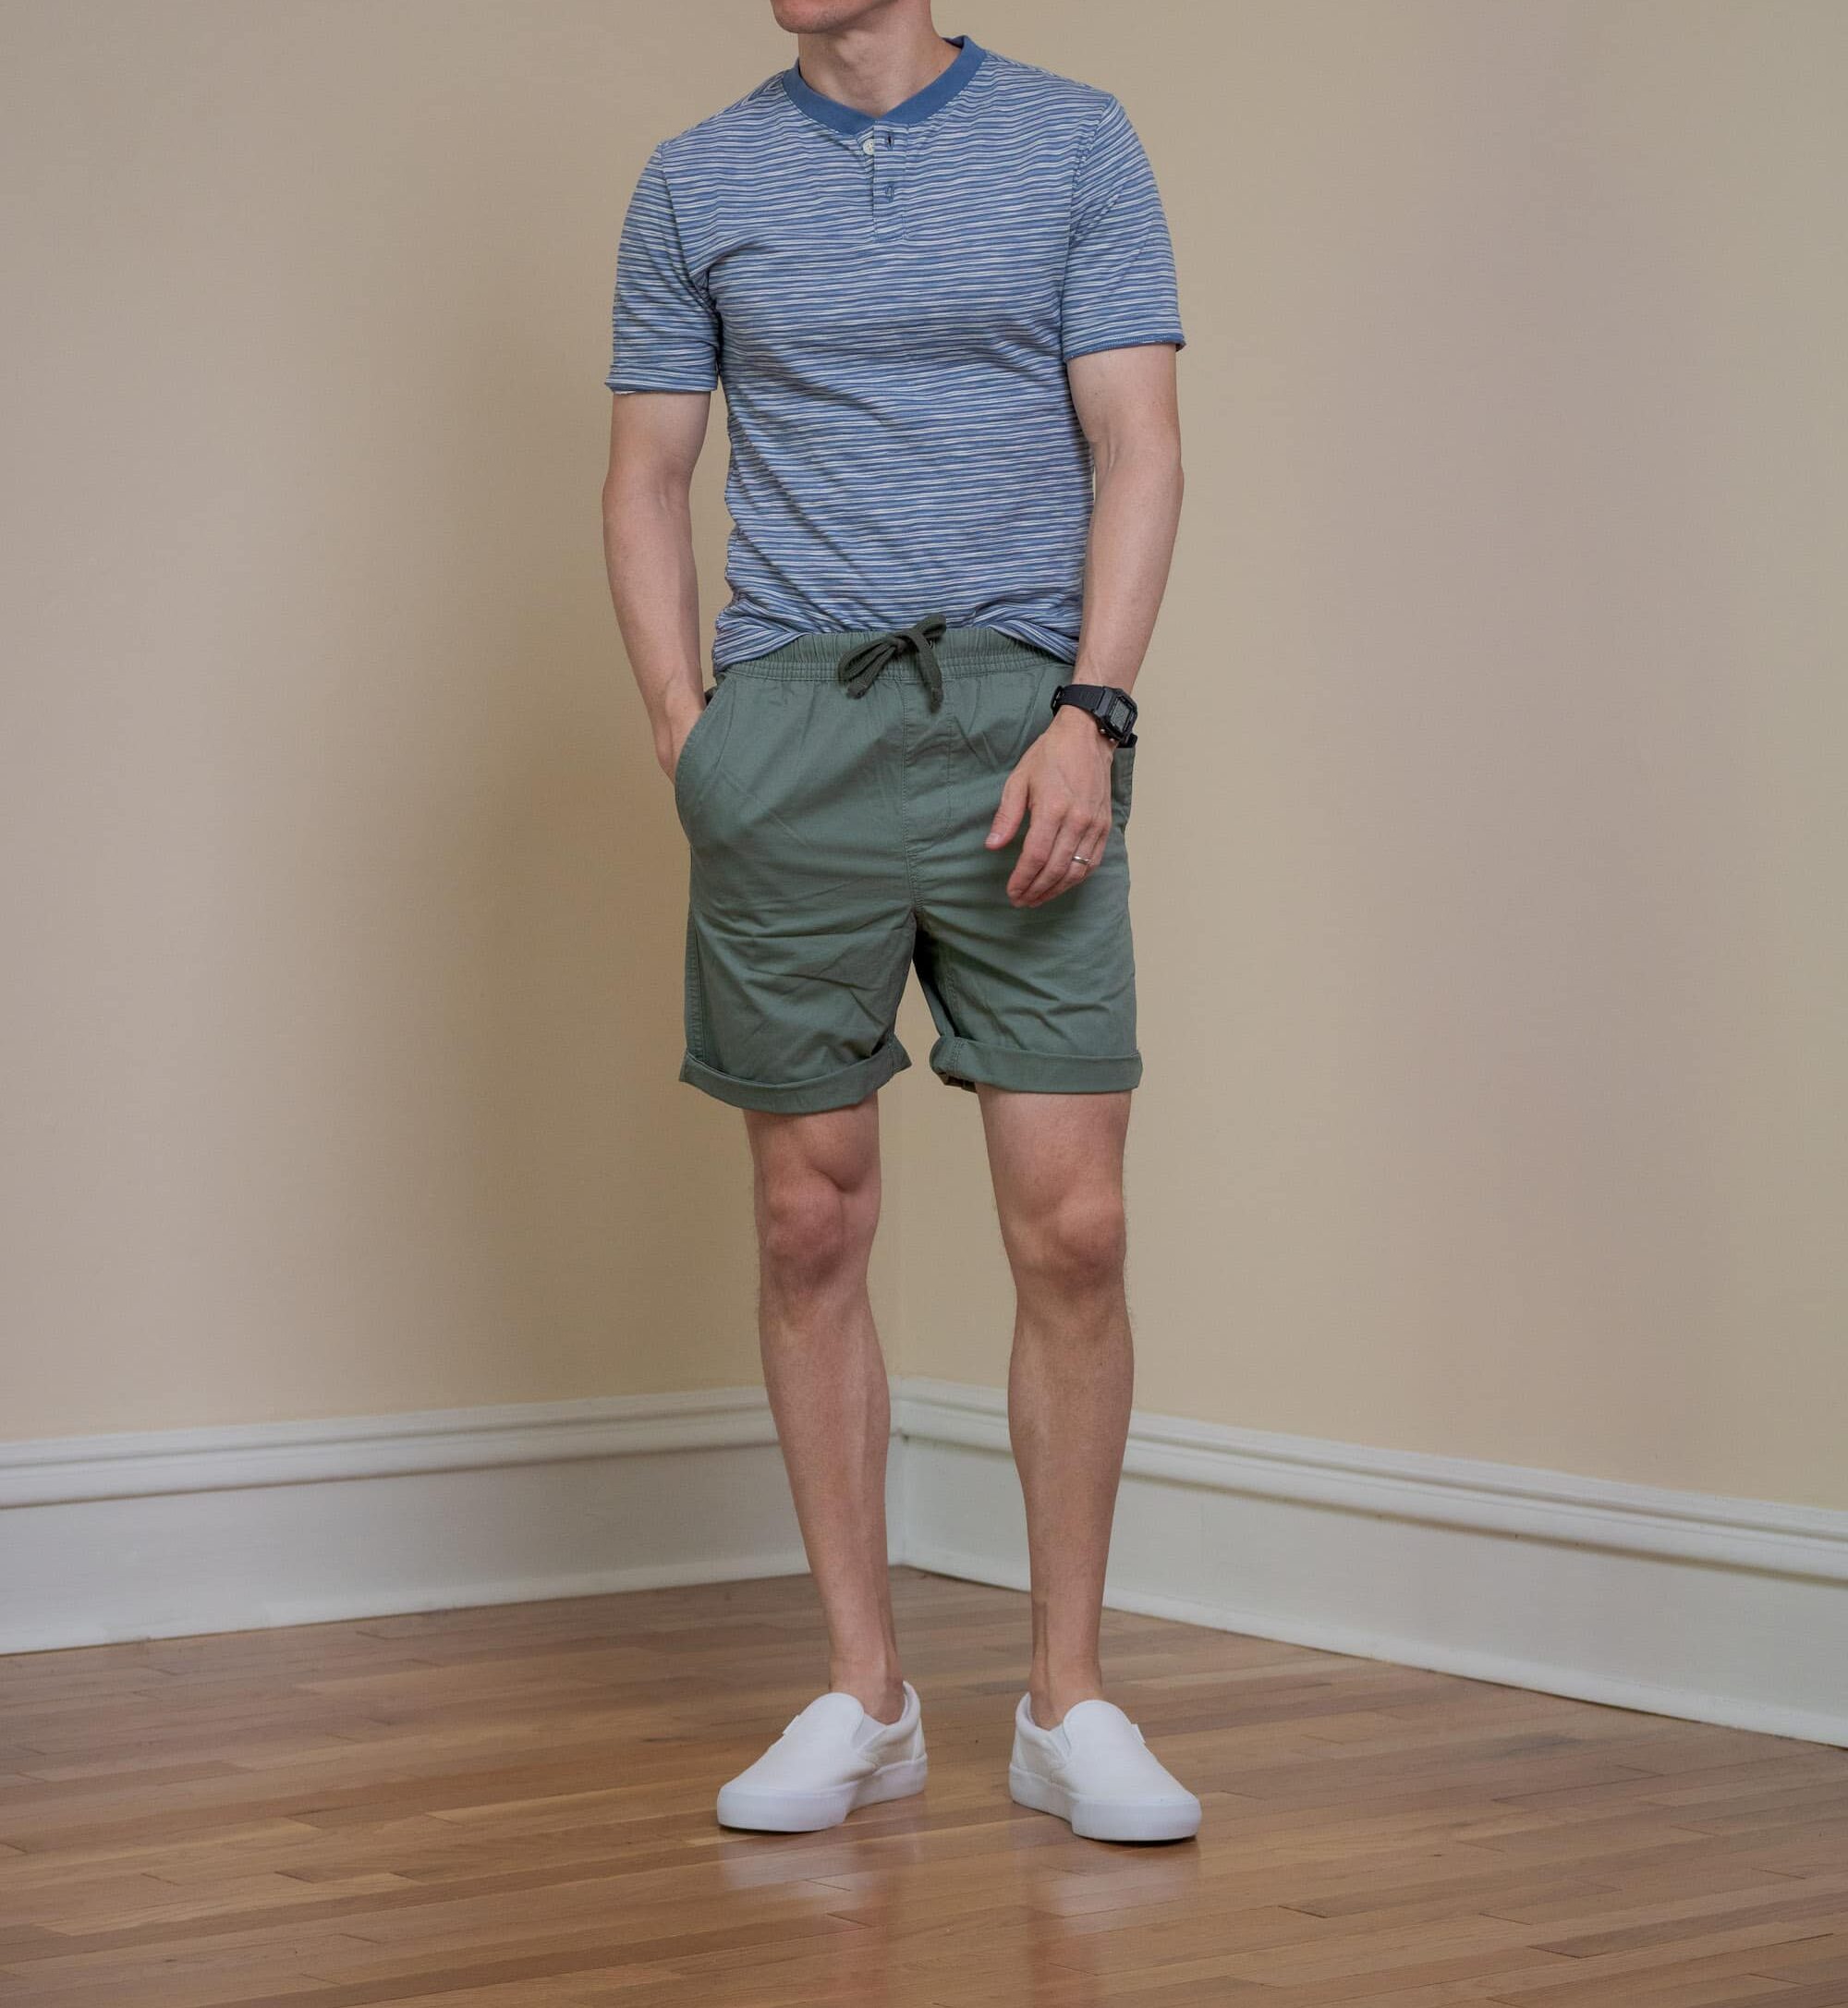 5 Denim Shorts Outfit Ideas For Men To Look Cool  Mens shorts outfits, Mens  casual outfits summer, Men fashion casual outfits